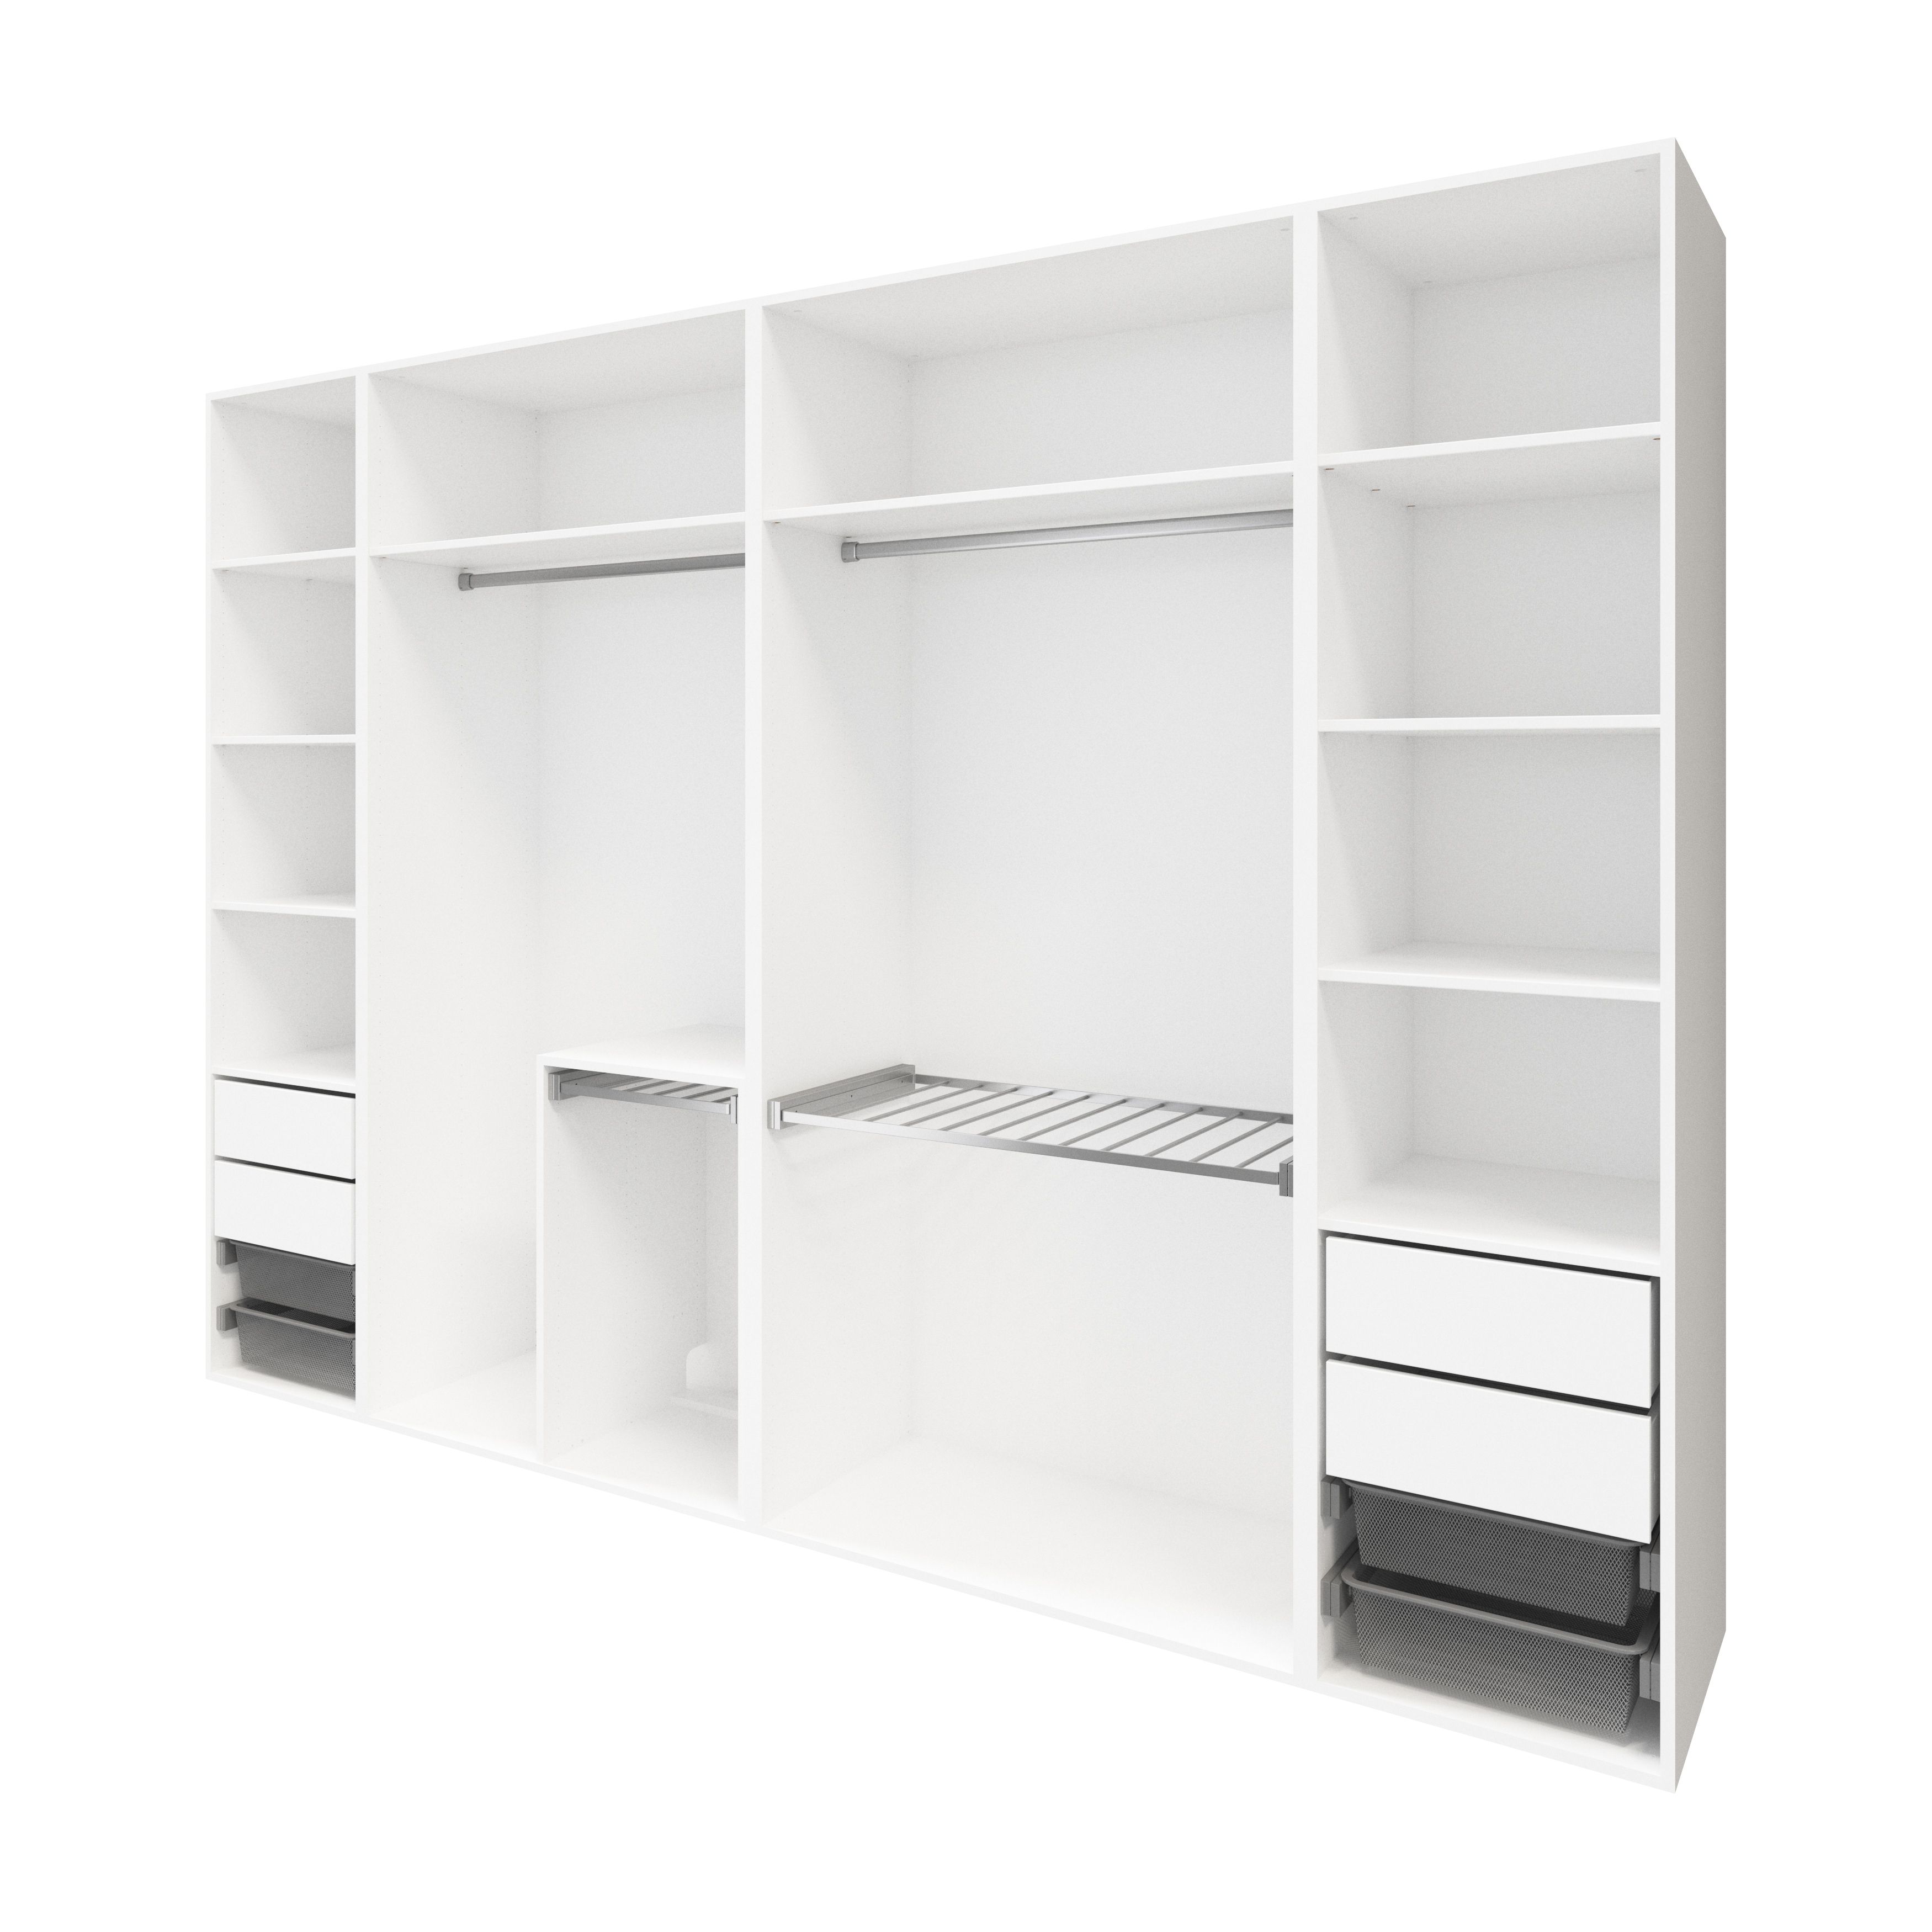 GoodHome Atomia White Wardrobe, clothing & shoes organiser (H)2250mm (W)3000mm (D)580mm